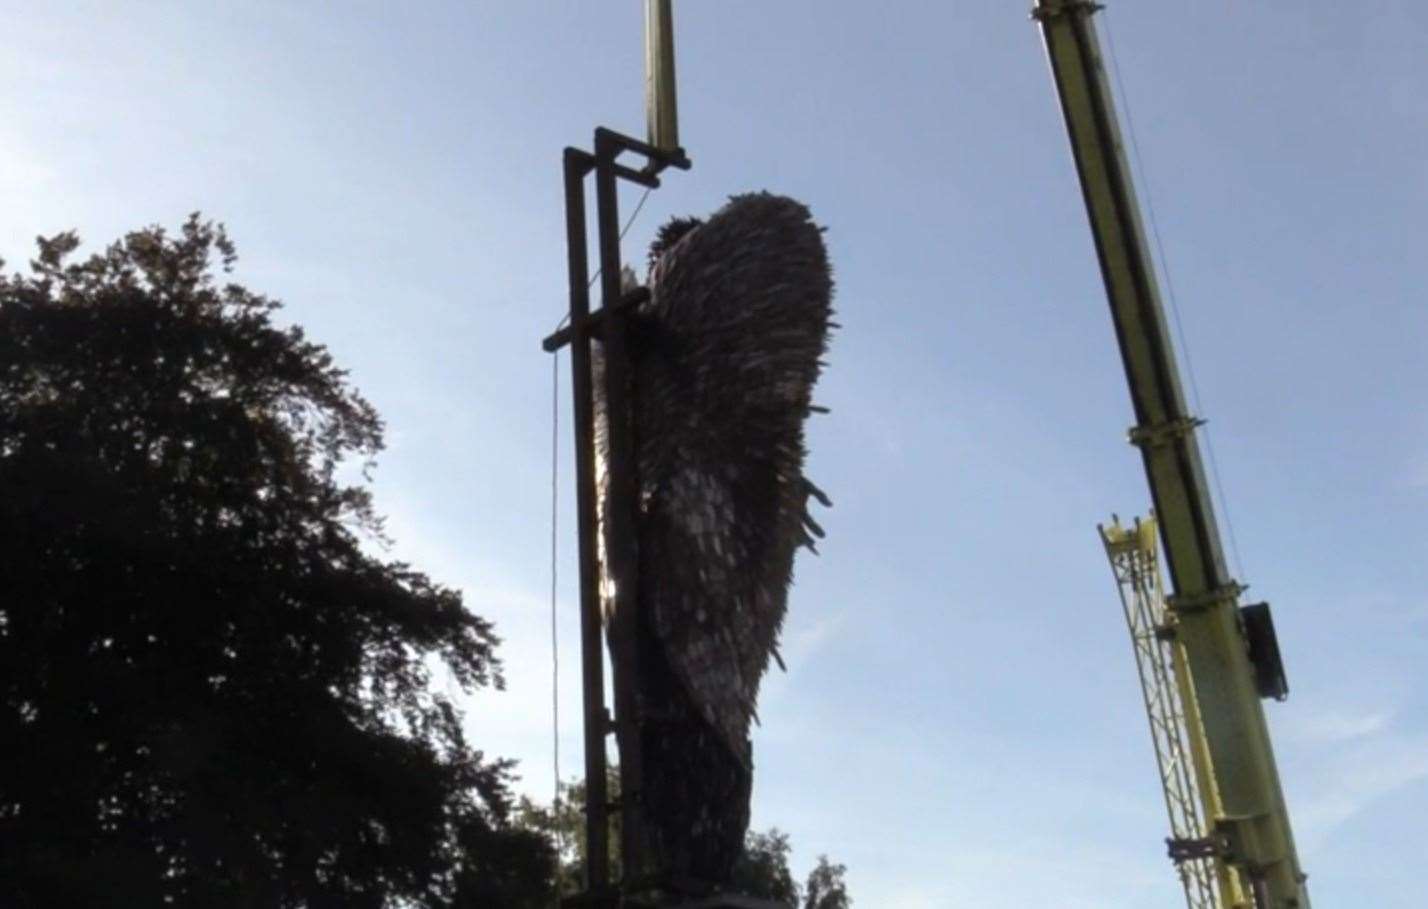 The knife angel being lifted into place